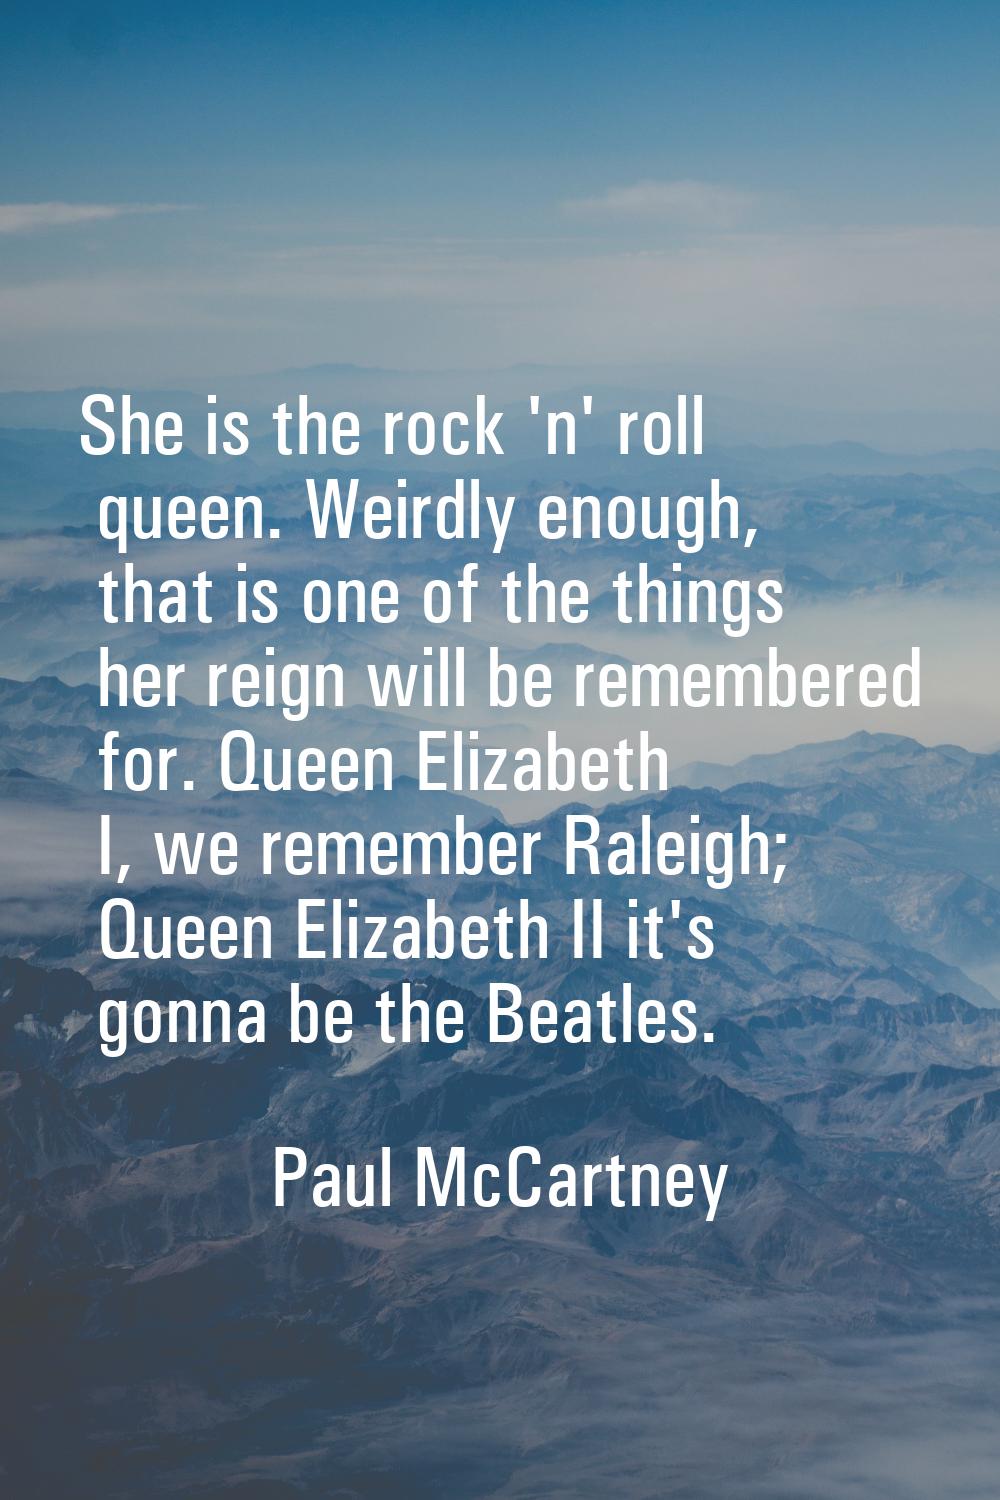 She is the rock 'n' roll queen. Weirdly enough, that is one of the things her reign will be remembe